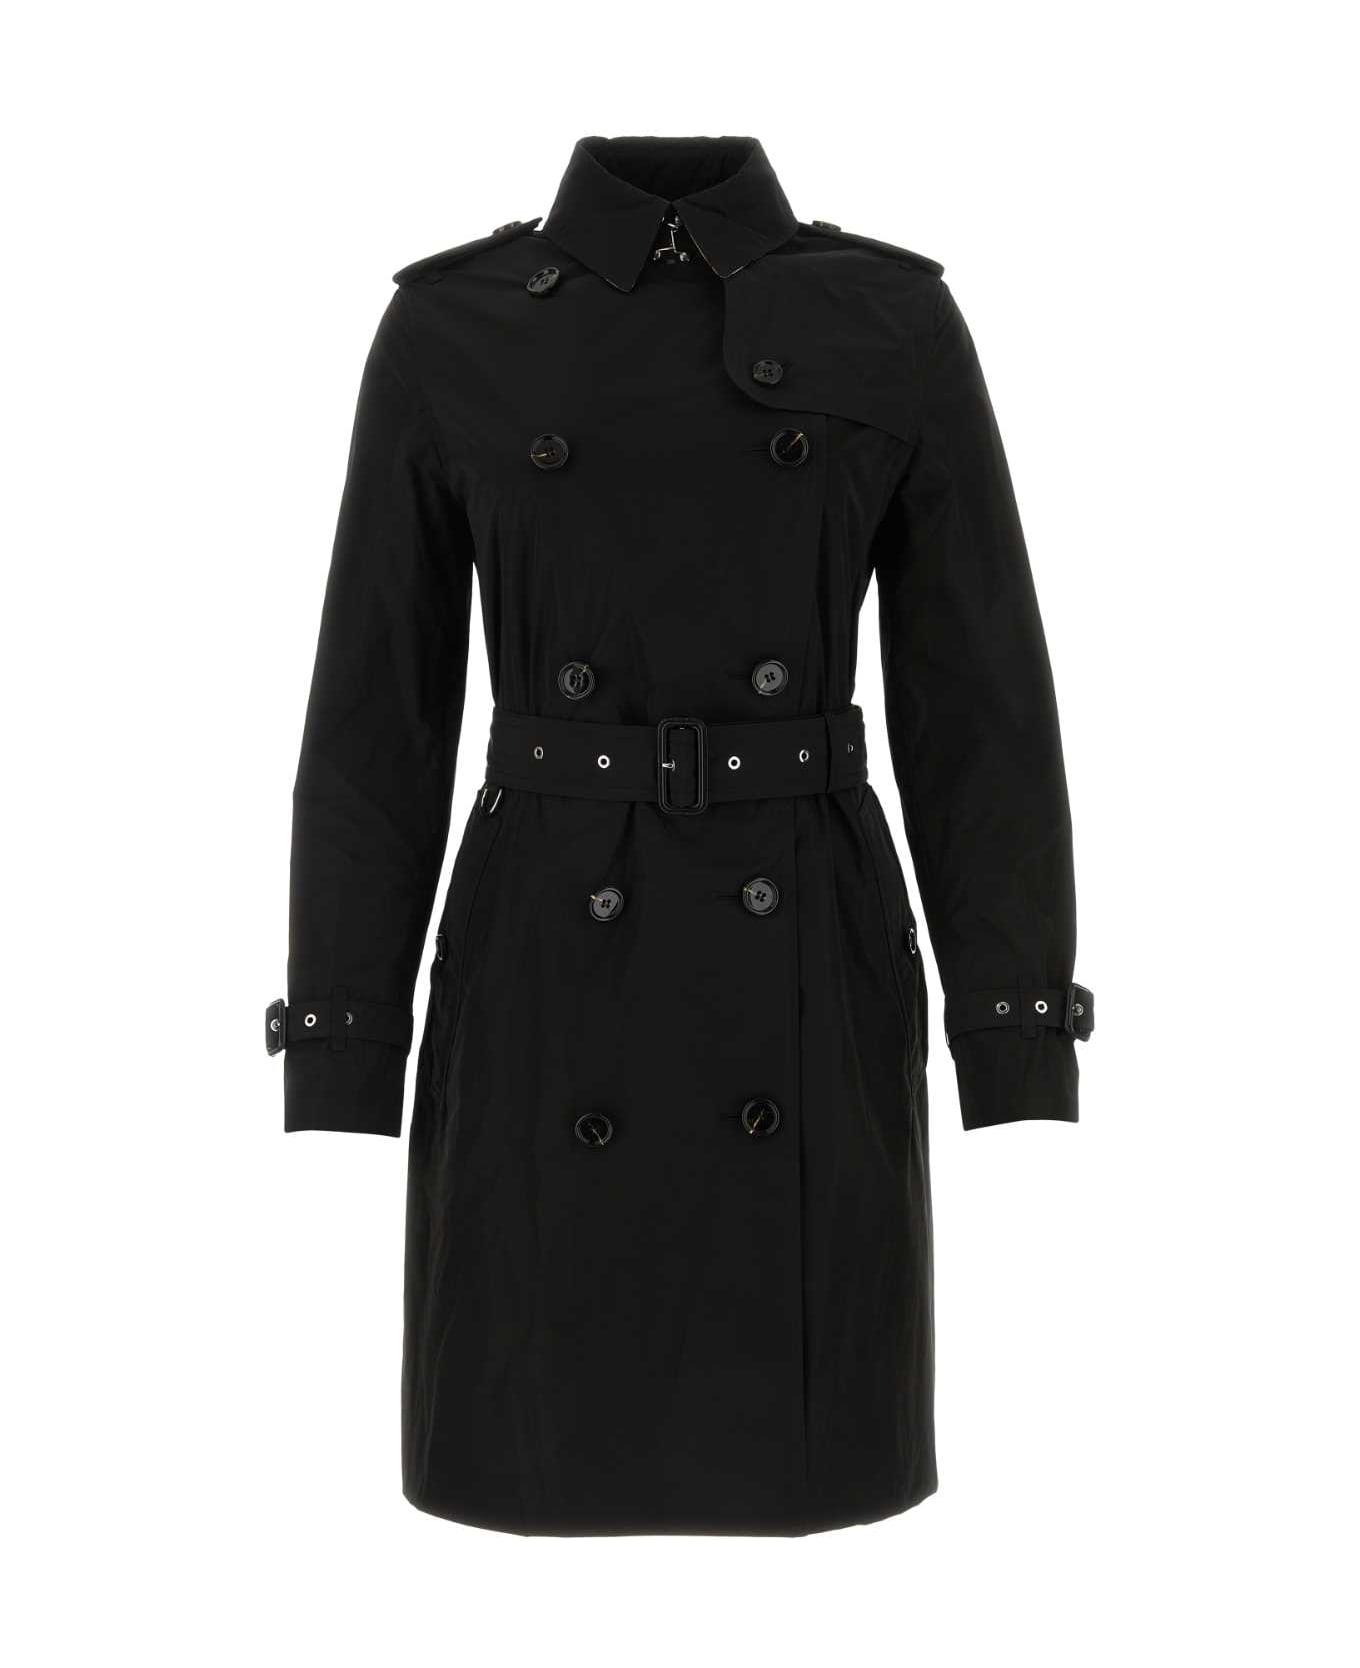 Burberry Black Polyester Trench Coat - BLACK